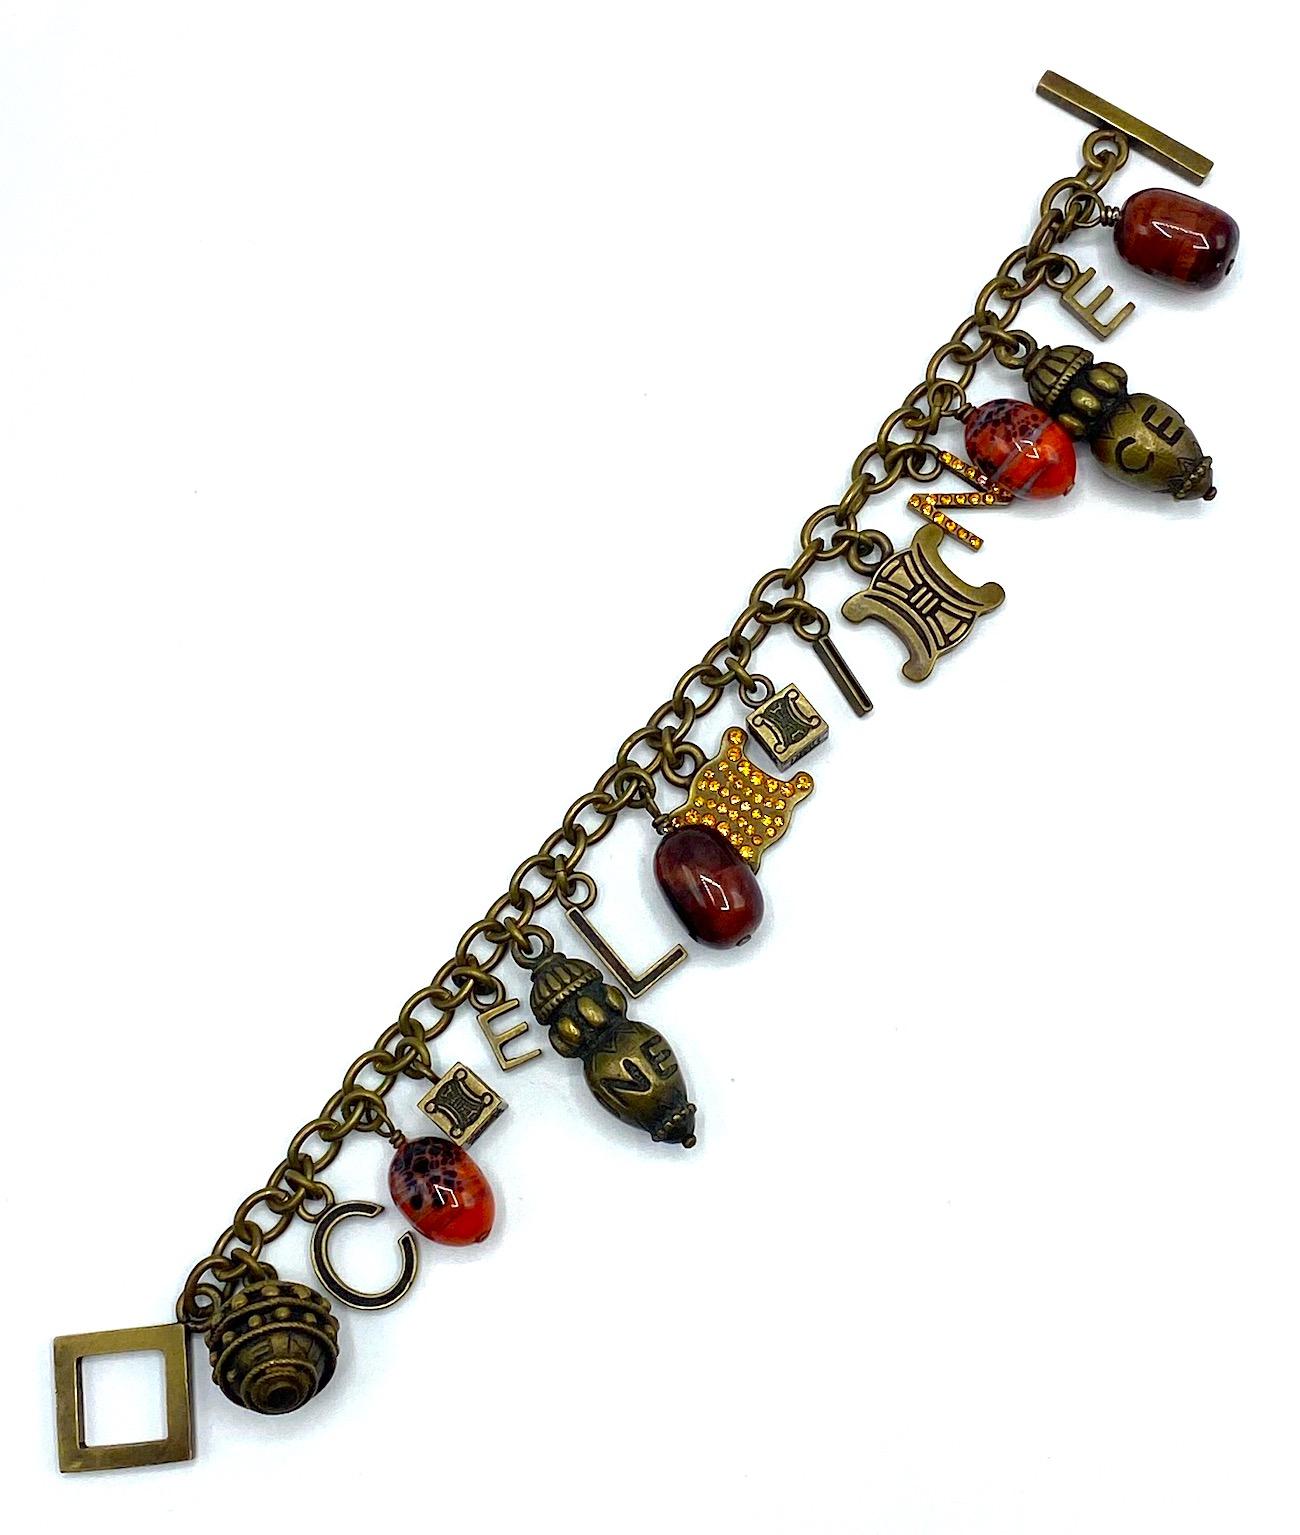 A beautiful and fully loaded charm bracelet by Celine from the 1990s. It has an antique bronze patina finish and has 17 charms. Six of the charms are letters that spell out Celine. Four charms are hand made glass beads and most likely made in